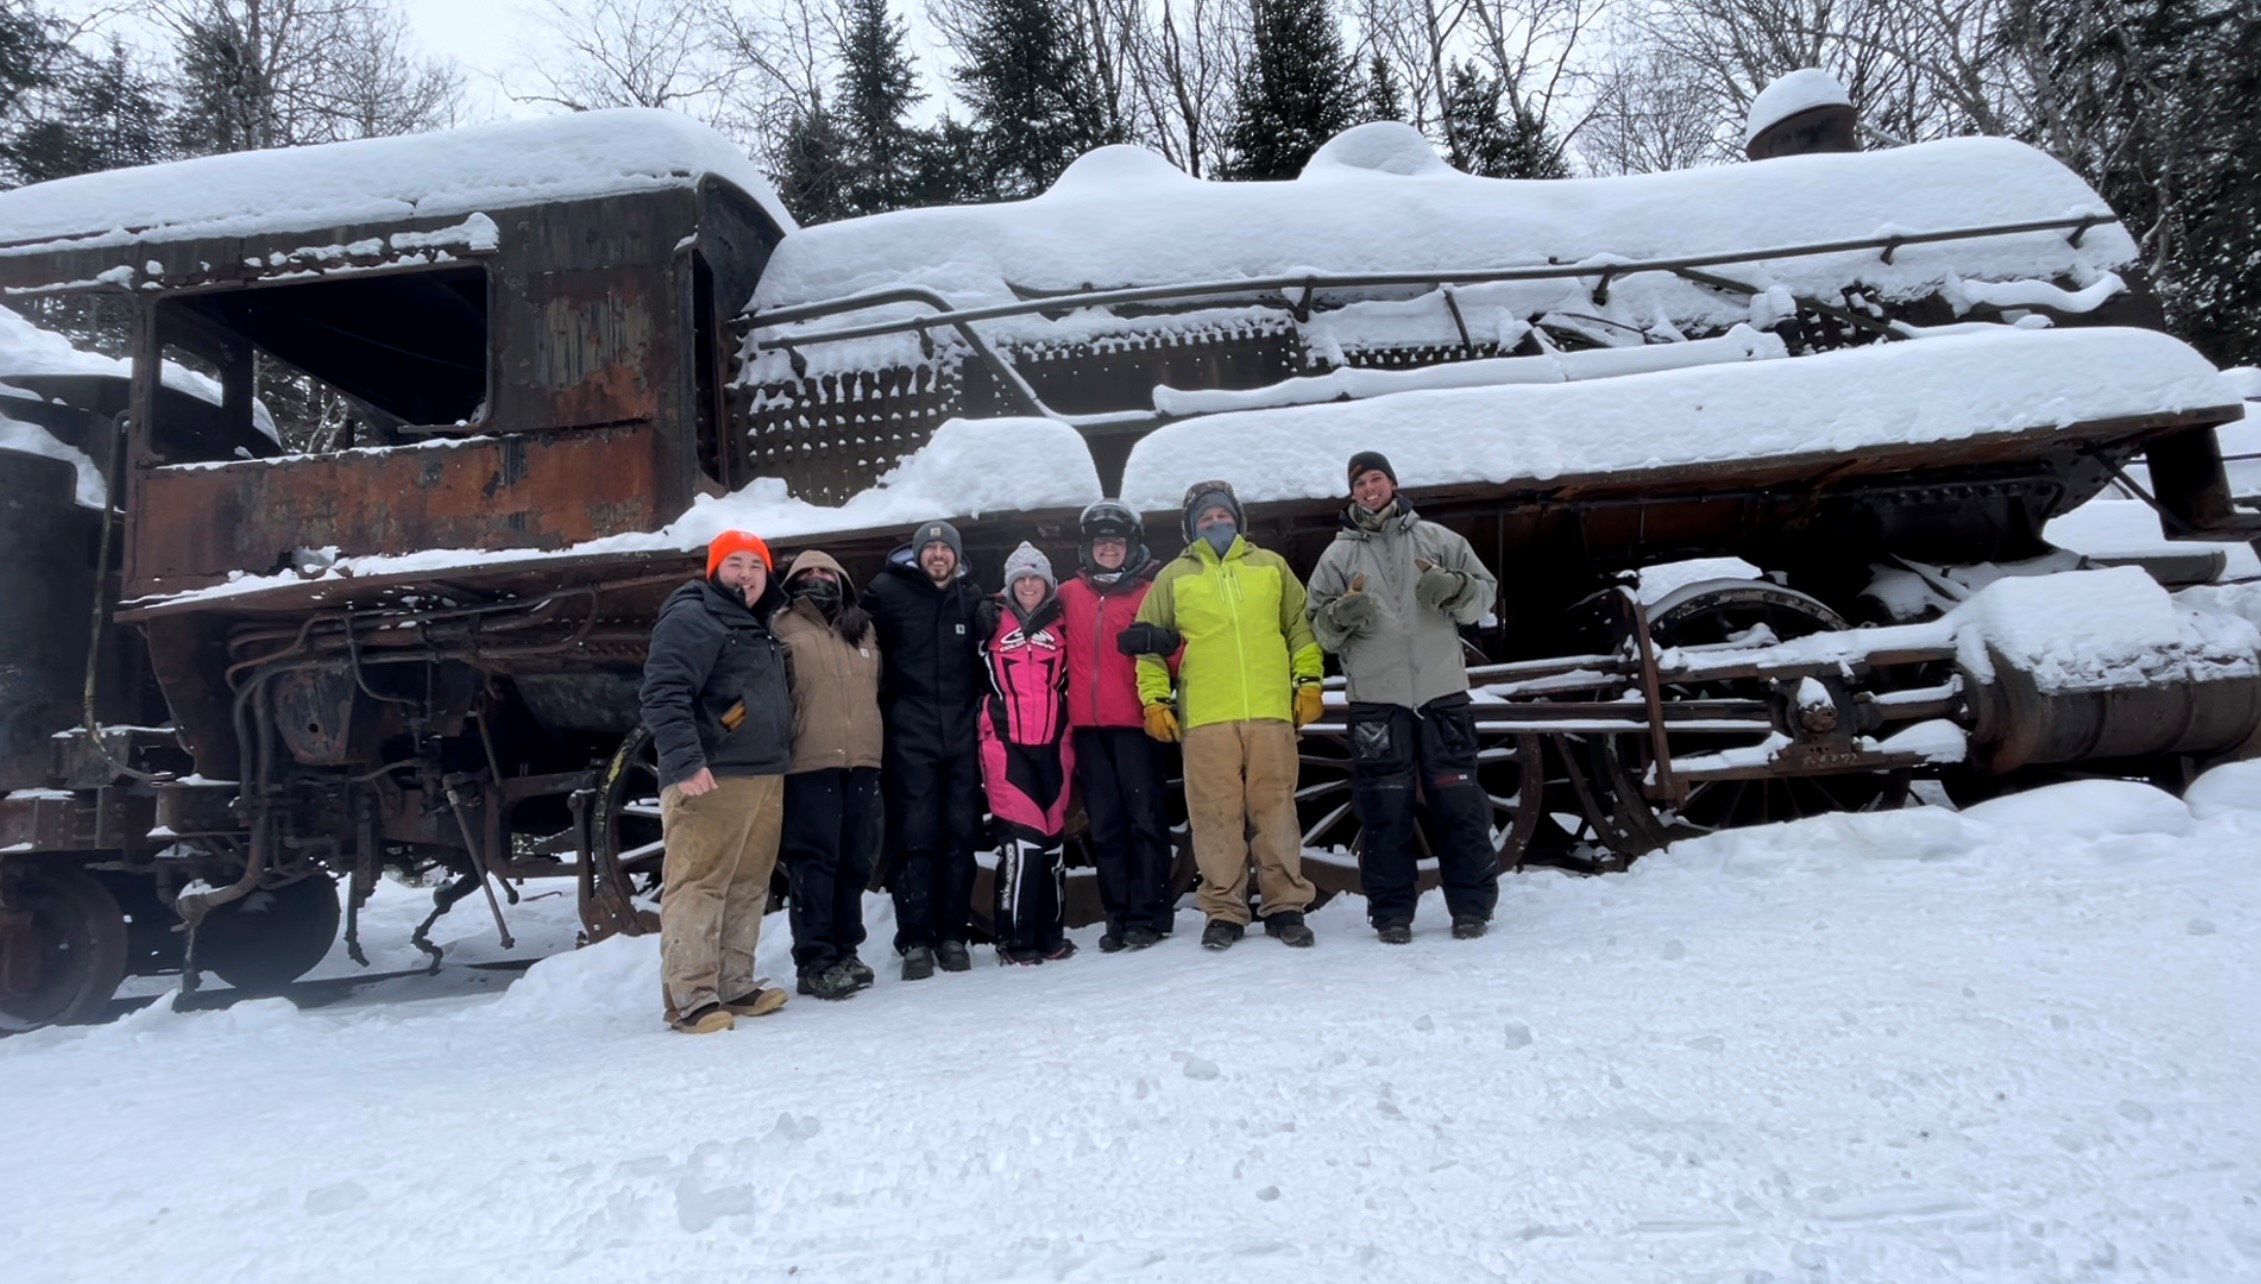 Image of Cullen and friends after they found the legendary steam locomotives at Eagle Lake.